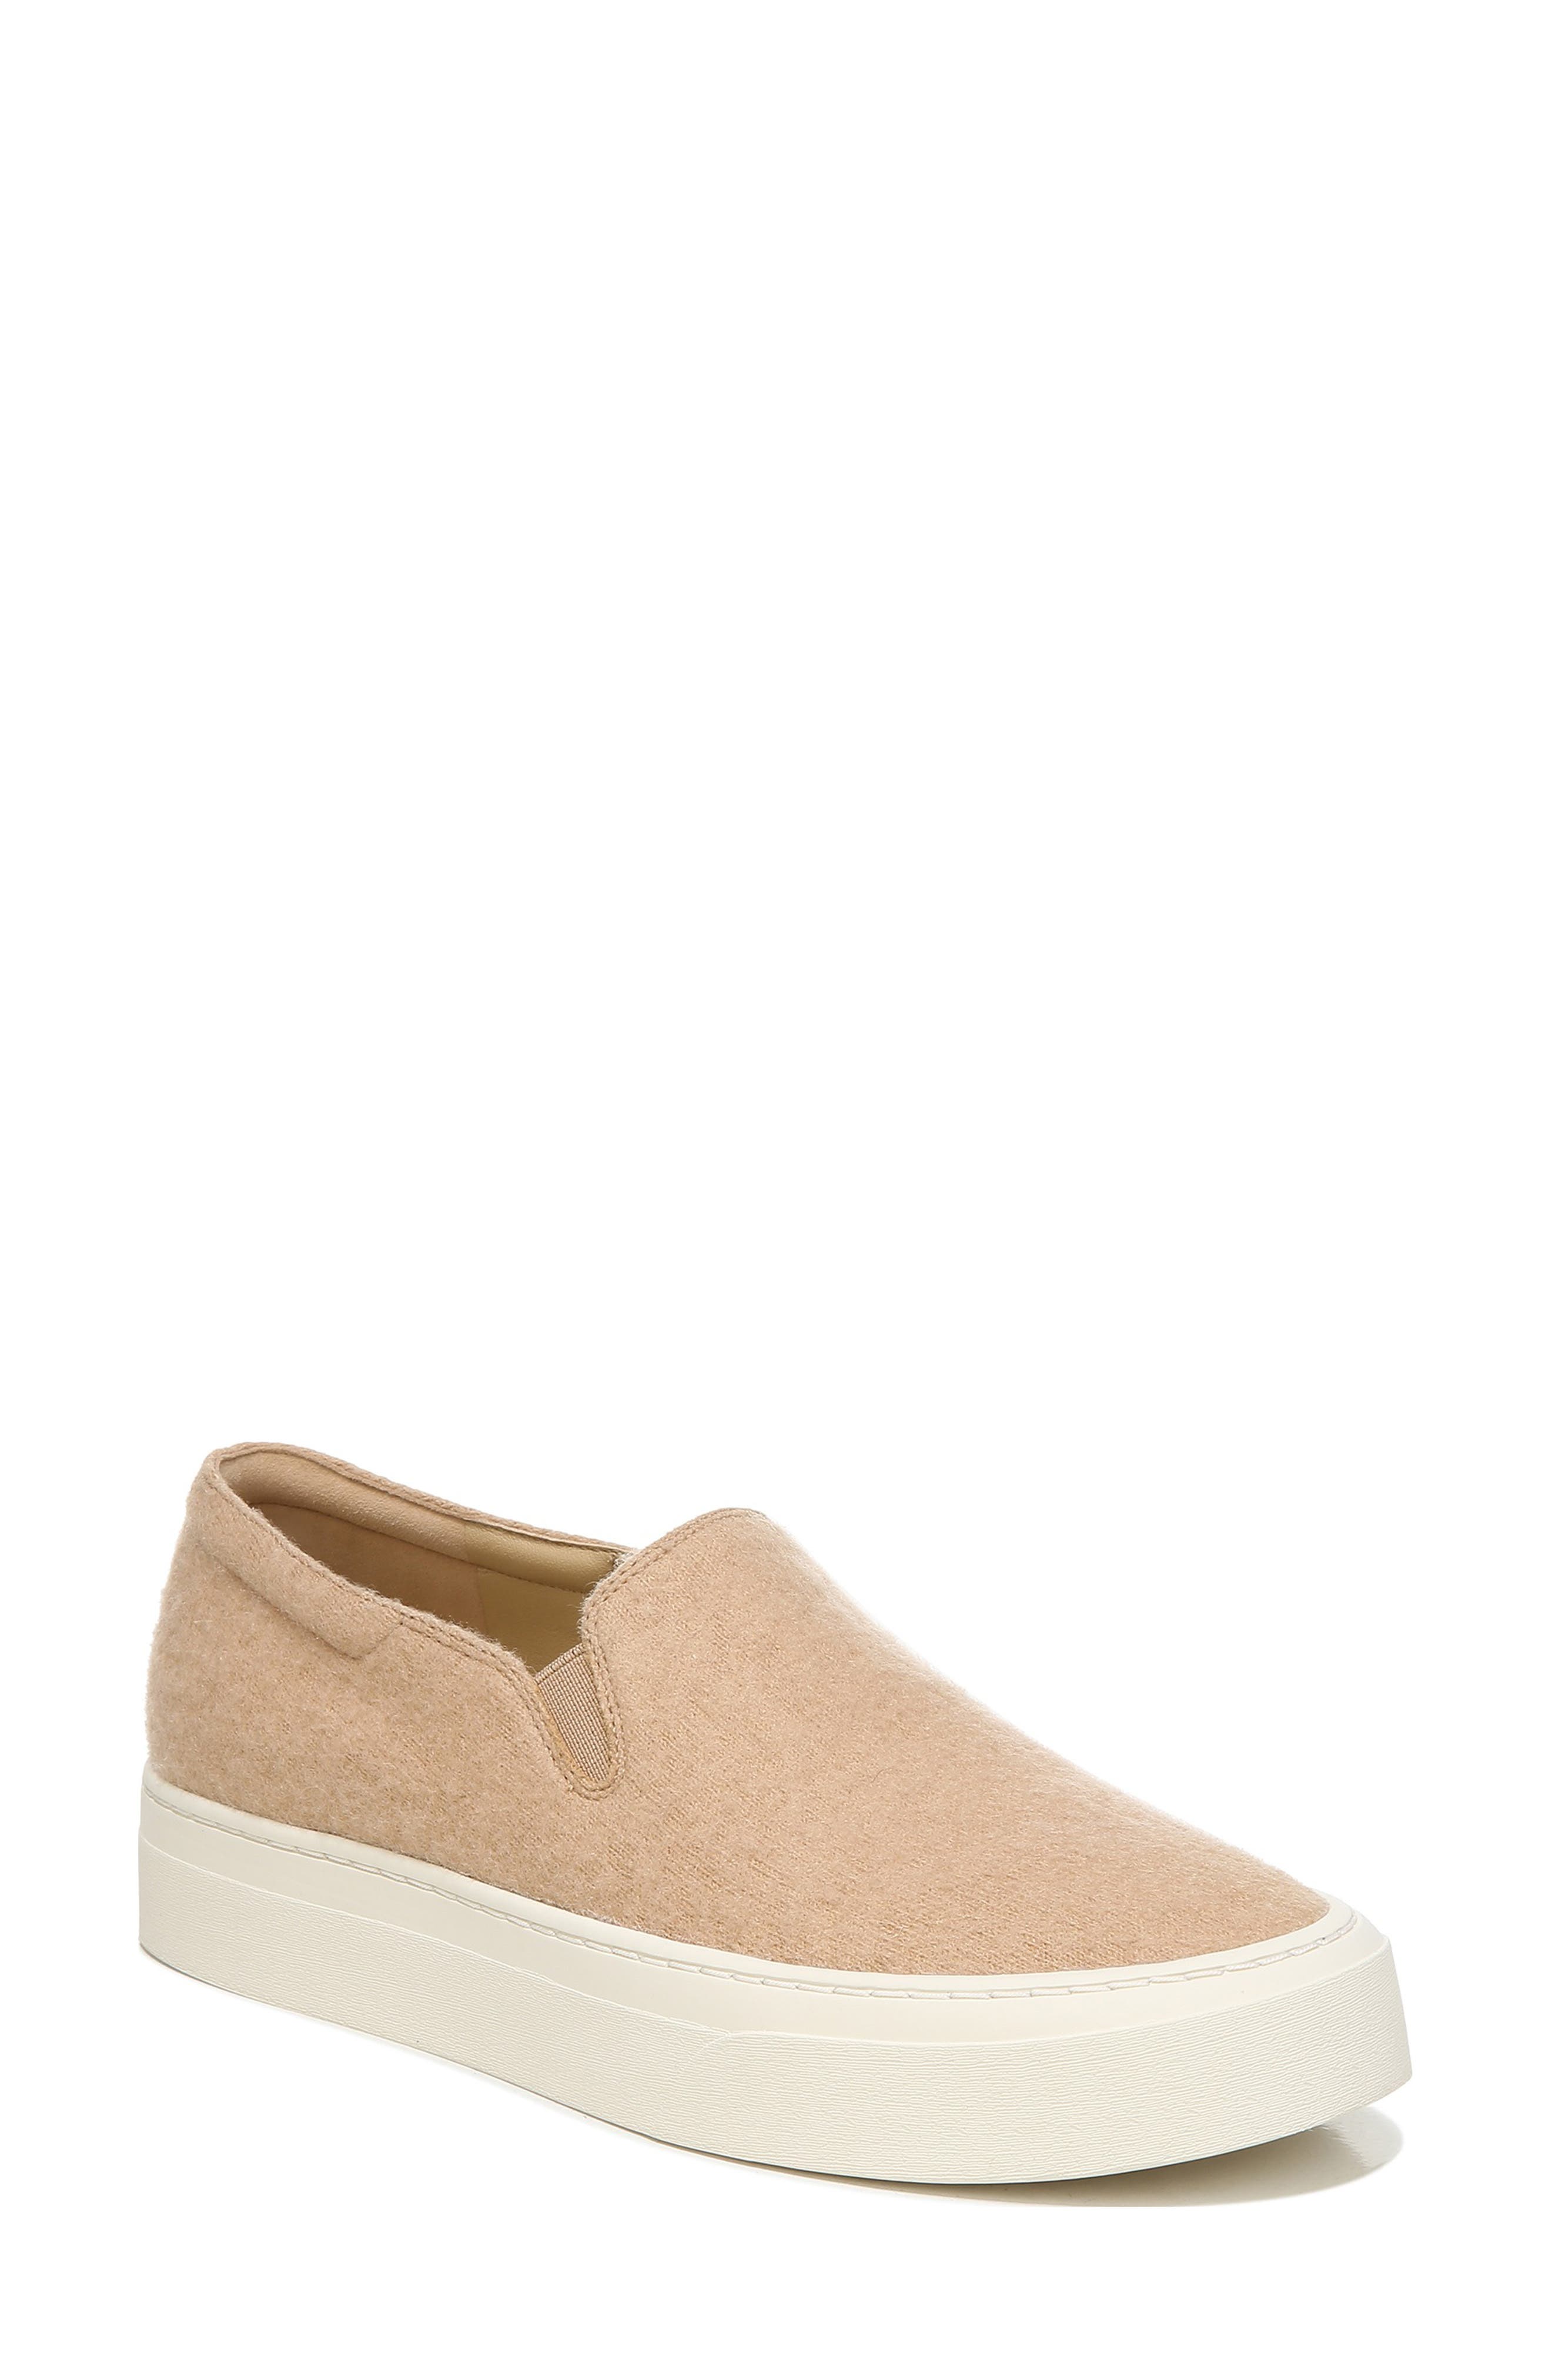 VINCE Jacey Slip-On Sneaker in Light Taupe